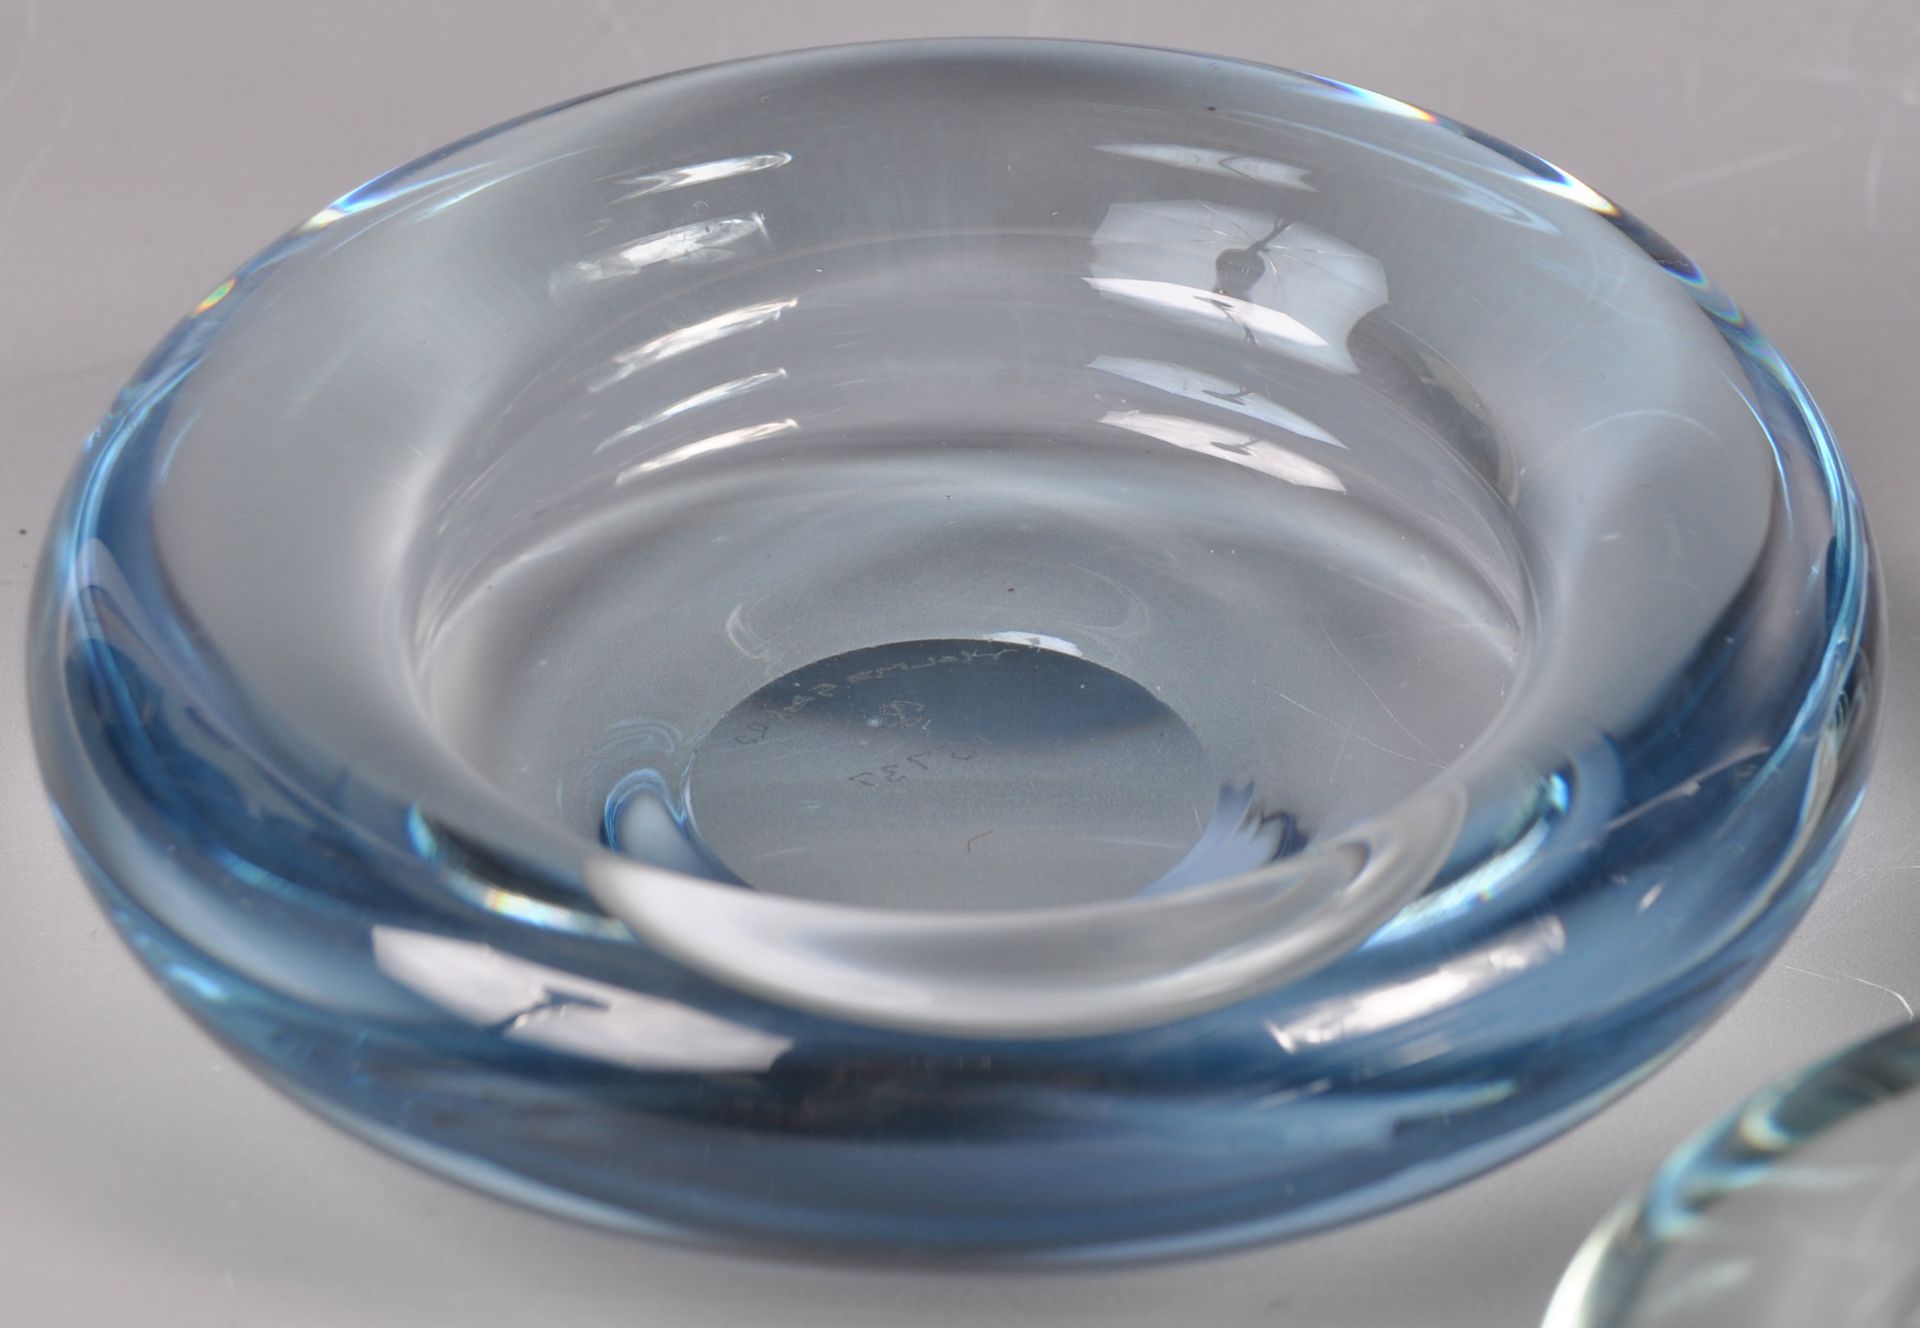 COLLECTION OF DANISH GLASS HOLMEGAARD BOWLS BY P. LUTKEN - Image 4 of 8